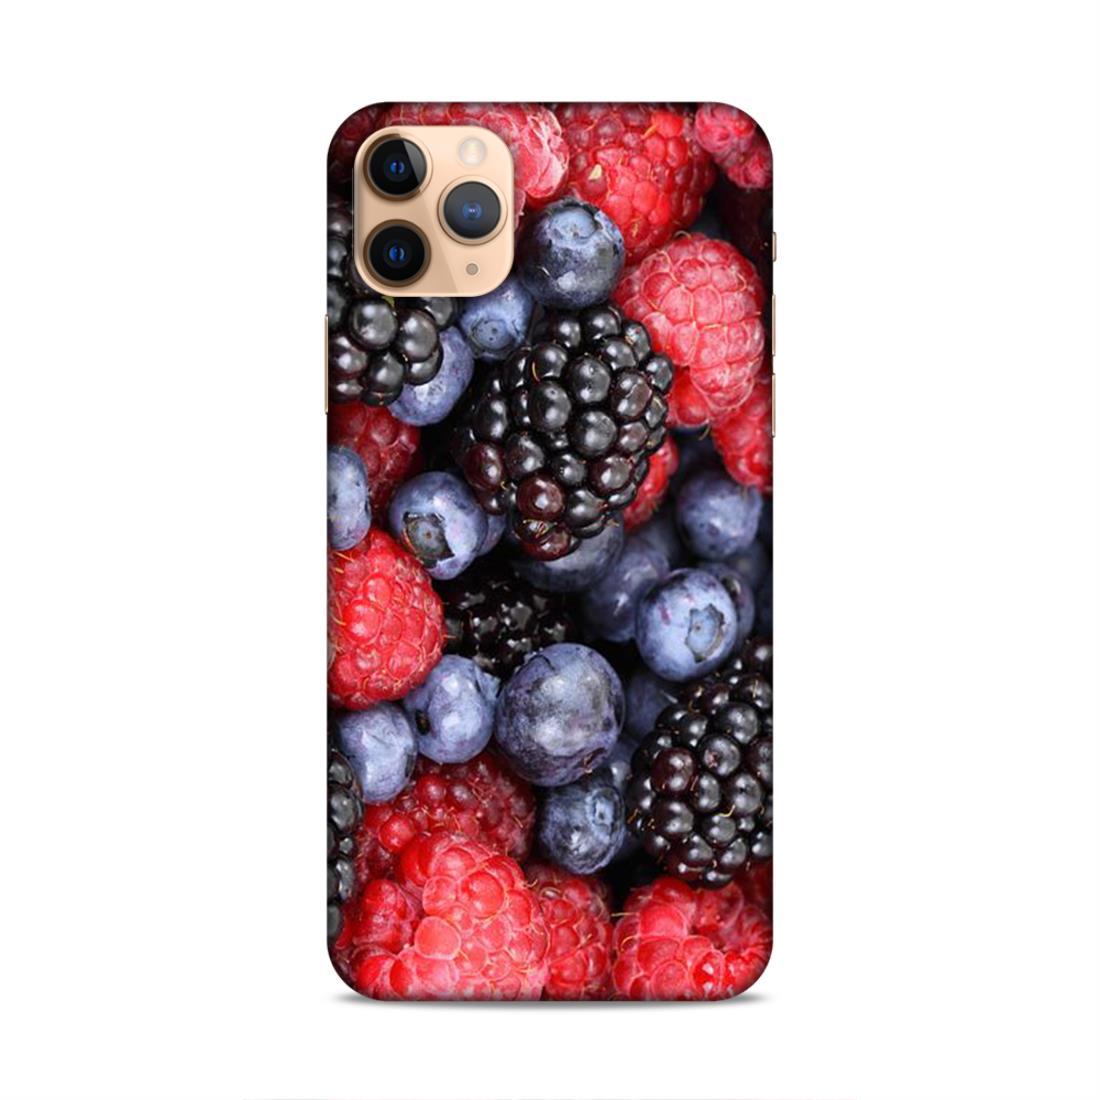 MultiFruits Love iPhone 11 Pro Mobile Back Case